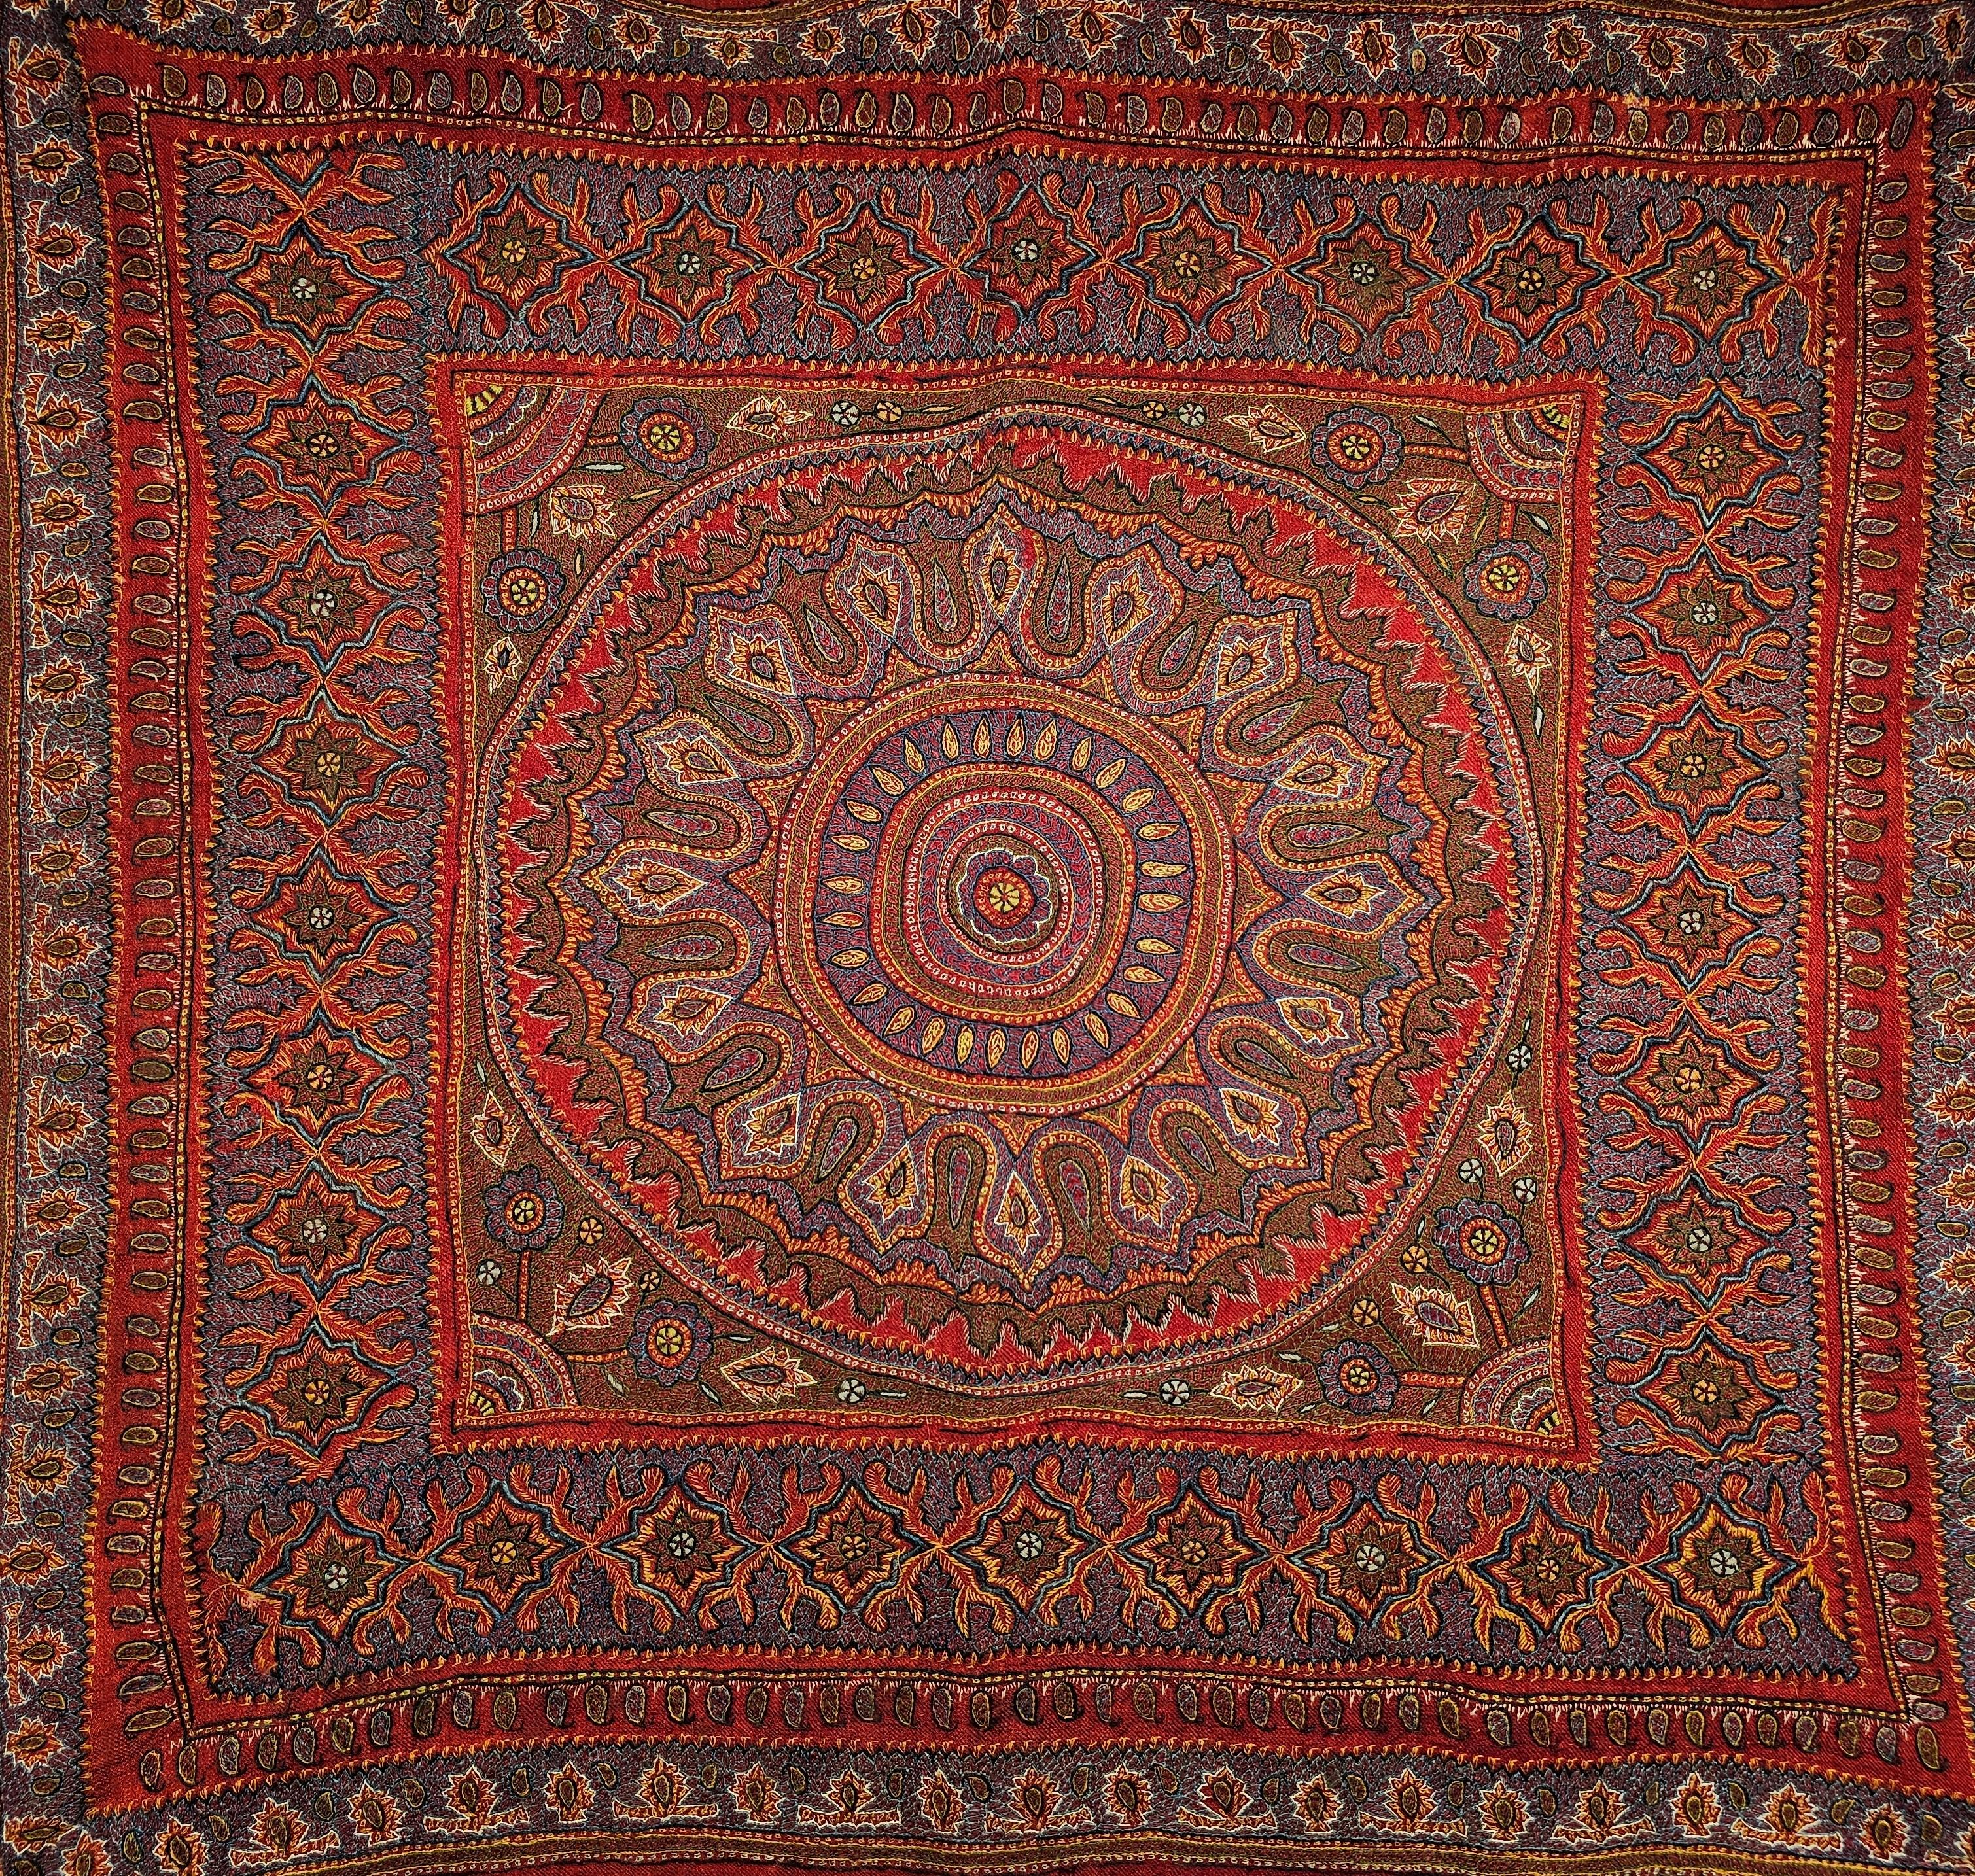 The distinctive Persian Kerman Suzani (Termeh embroidery in Persian) comes from the ancient city of Kerman in Persia. The hand embroidered textile tapestry is on a red cloth background with embroidery designs in blue, purple, yellow, and brown. The